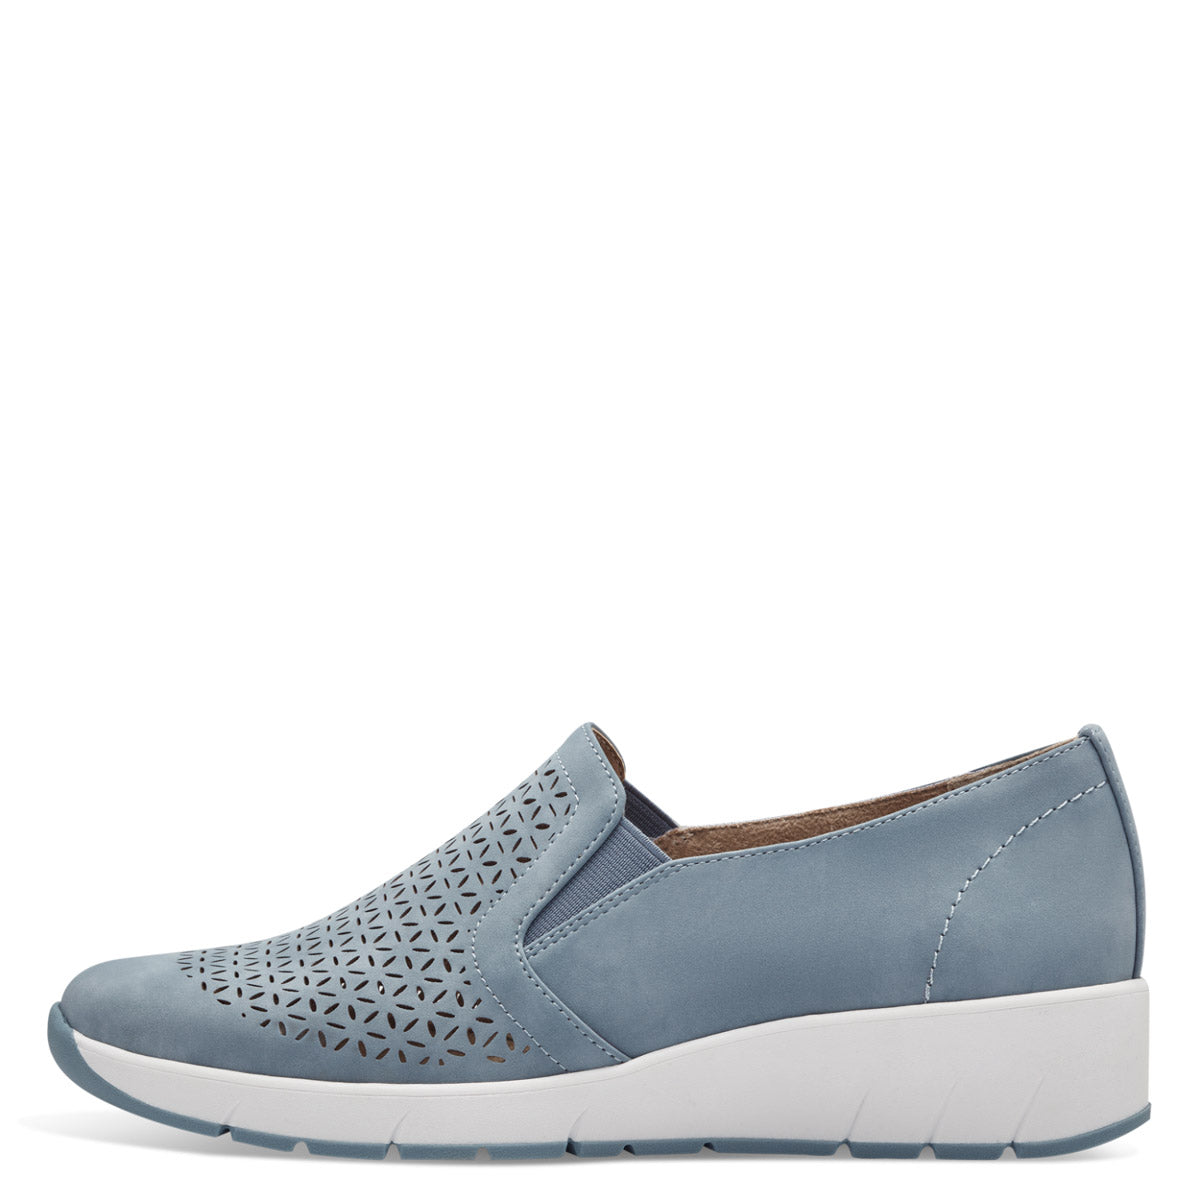 Front view of Jana Dusty Blue Slip-On with white sole.